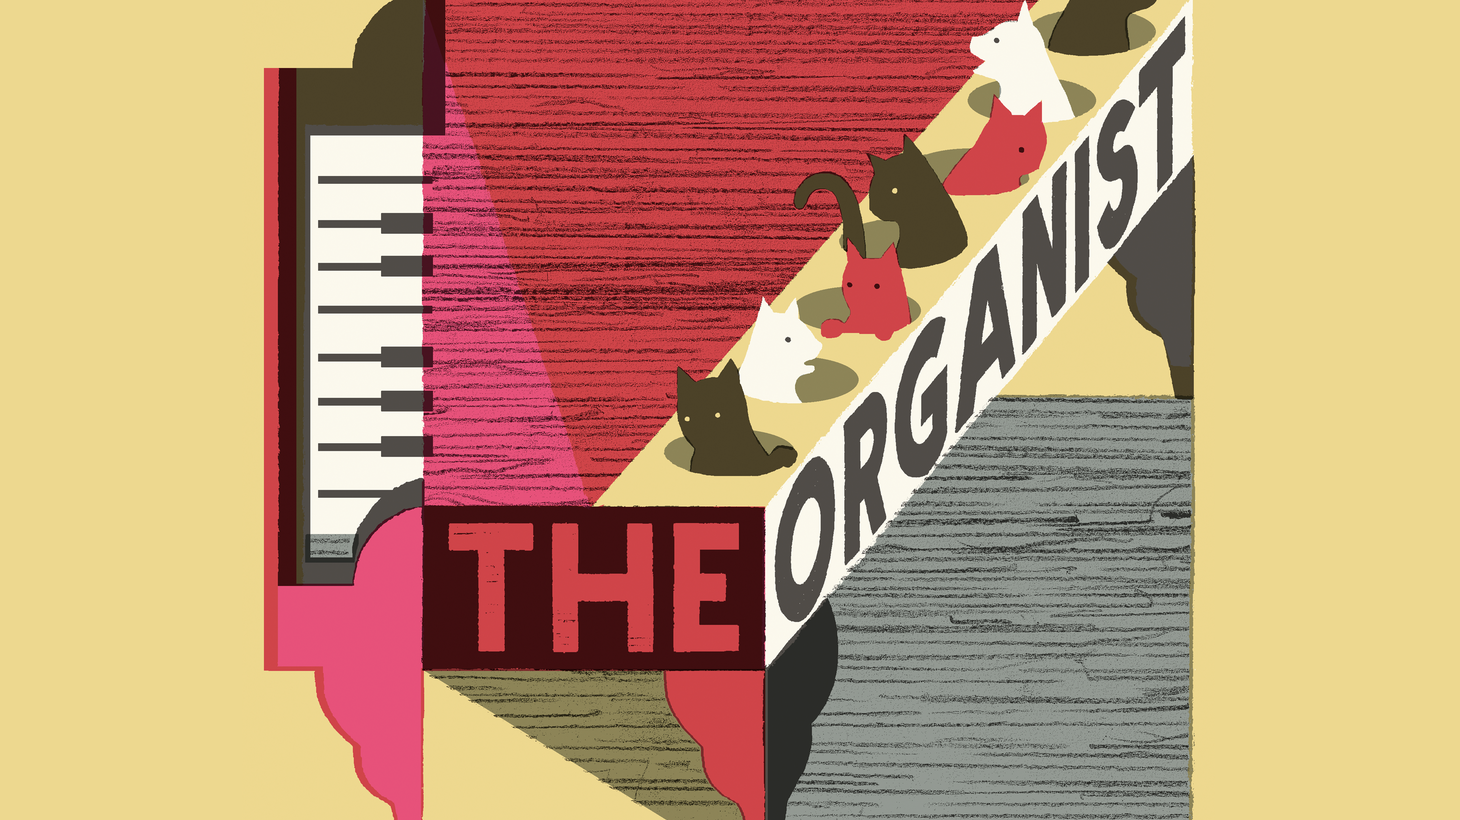 The debut episode of The Organist features George Saunders, Nick Offerman, five-word record reviews, and more.